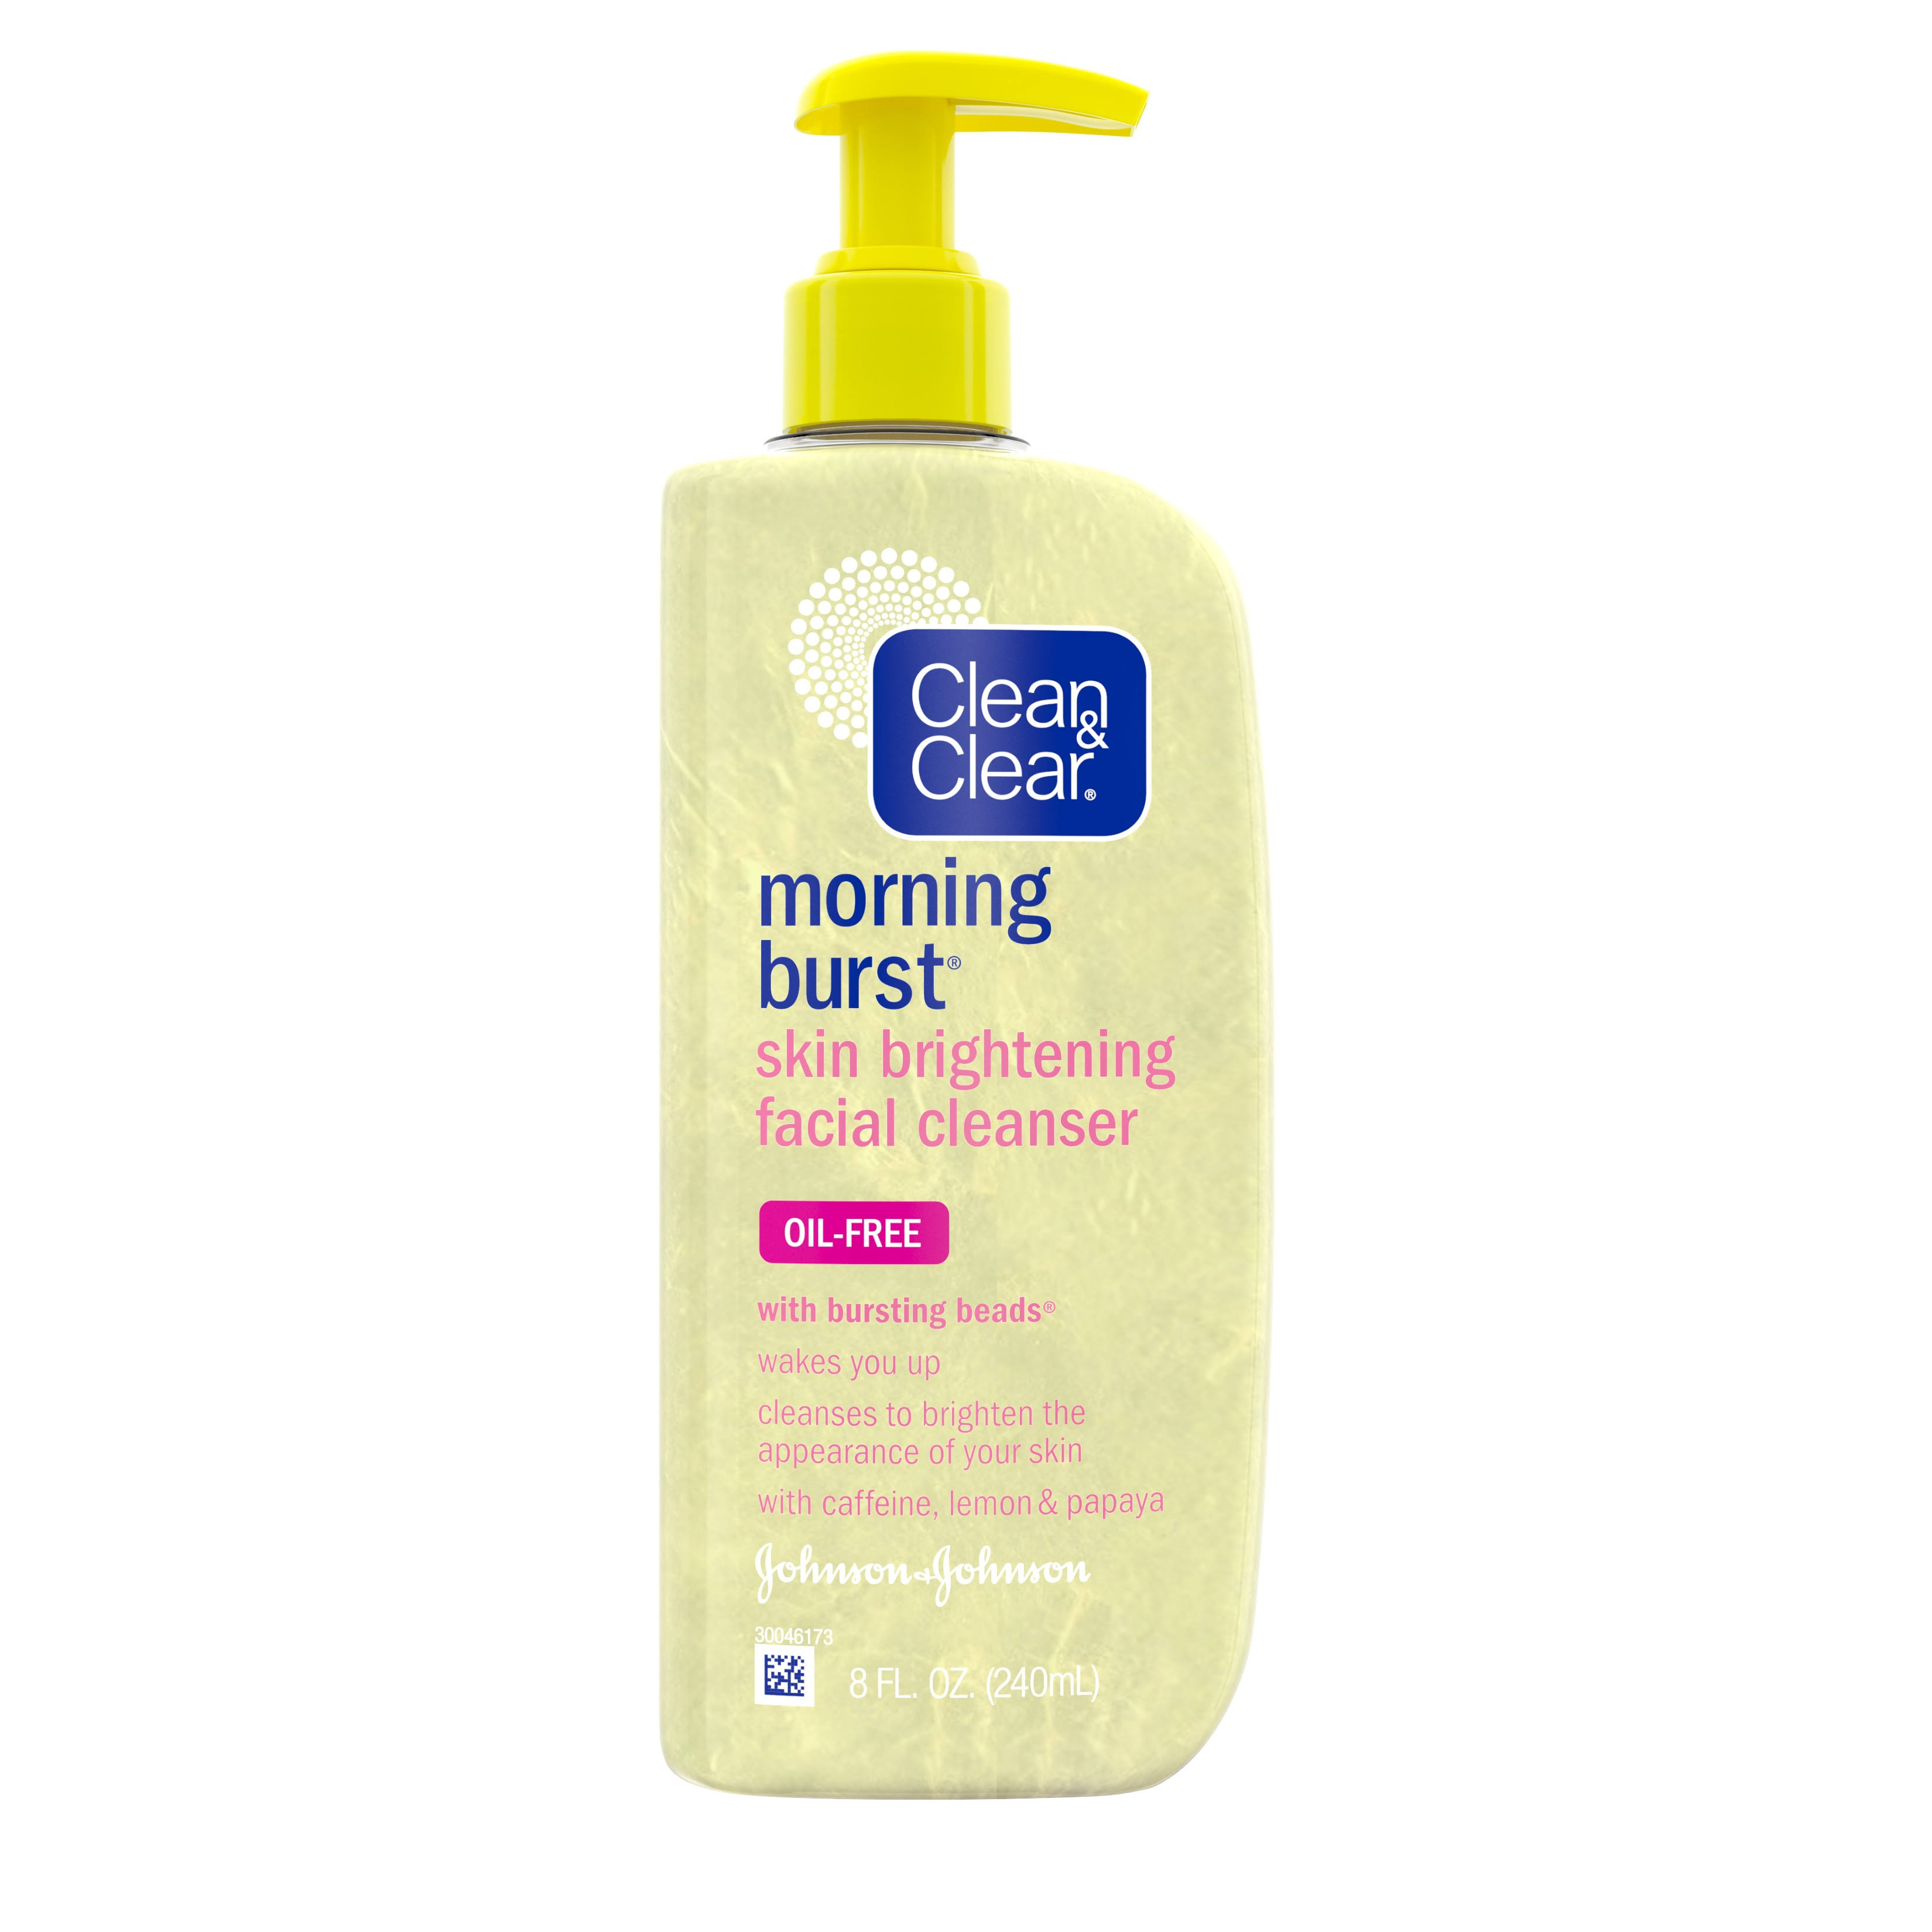 Clean & Clear Morning Burst Skin Brightening Facial Cleanser - 240ml